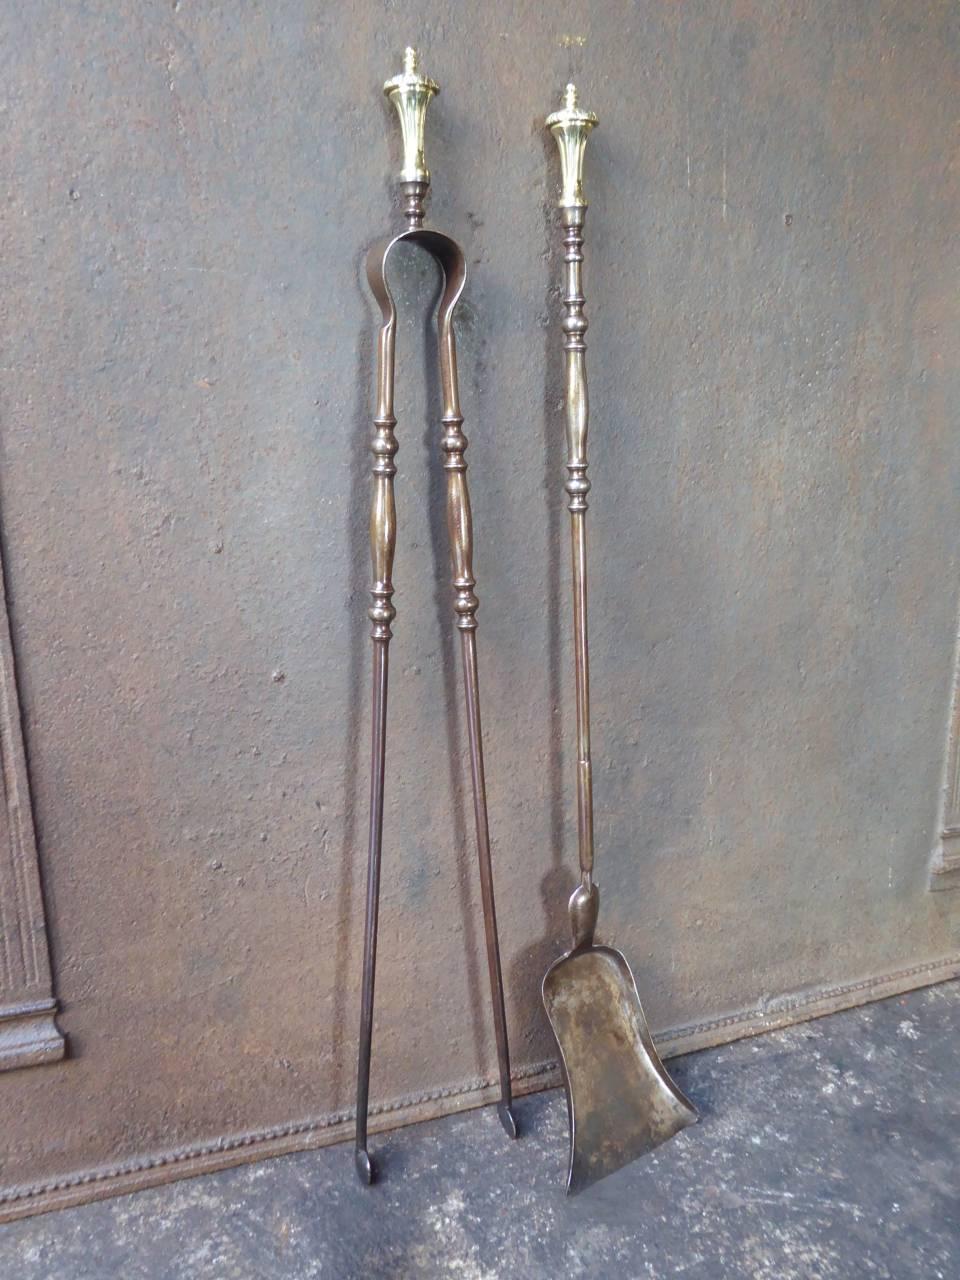 19th century French fireplace tools, fire irons made of wrought iron and polished brass.